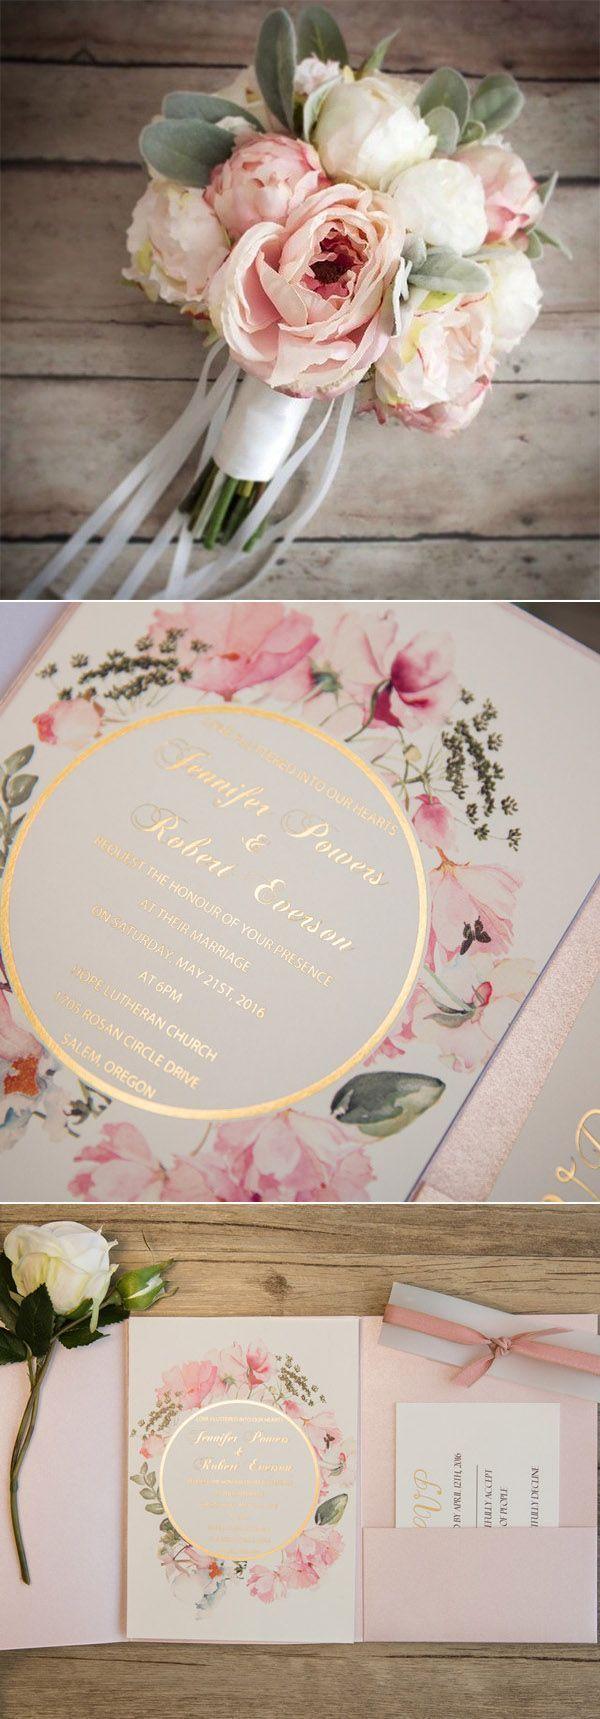 Wedding - Pink And Gold Glitter Pocket Wedding Invitations With Flowers In Watercolors EWPI209